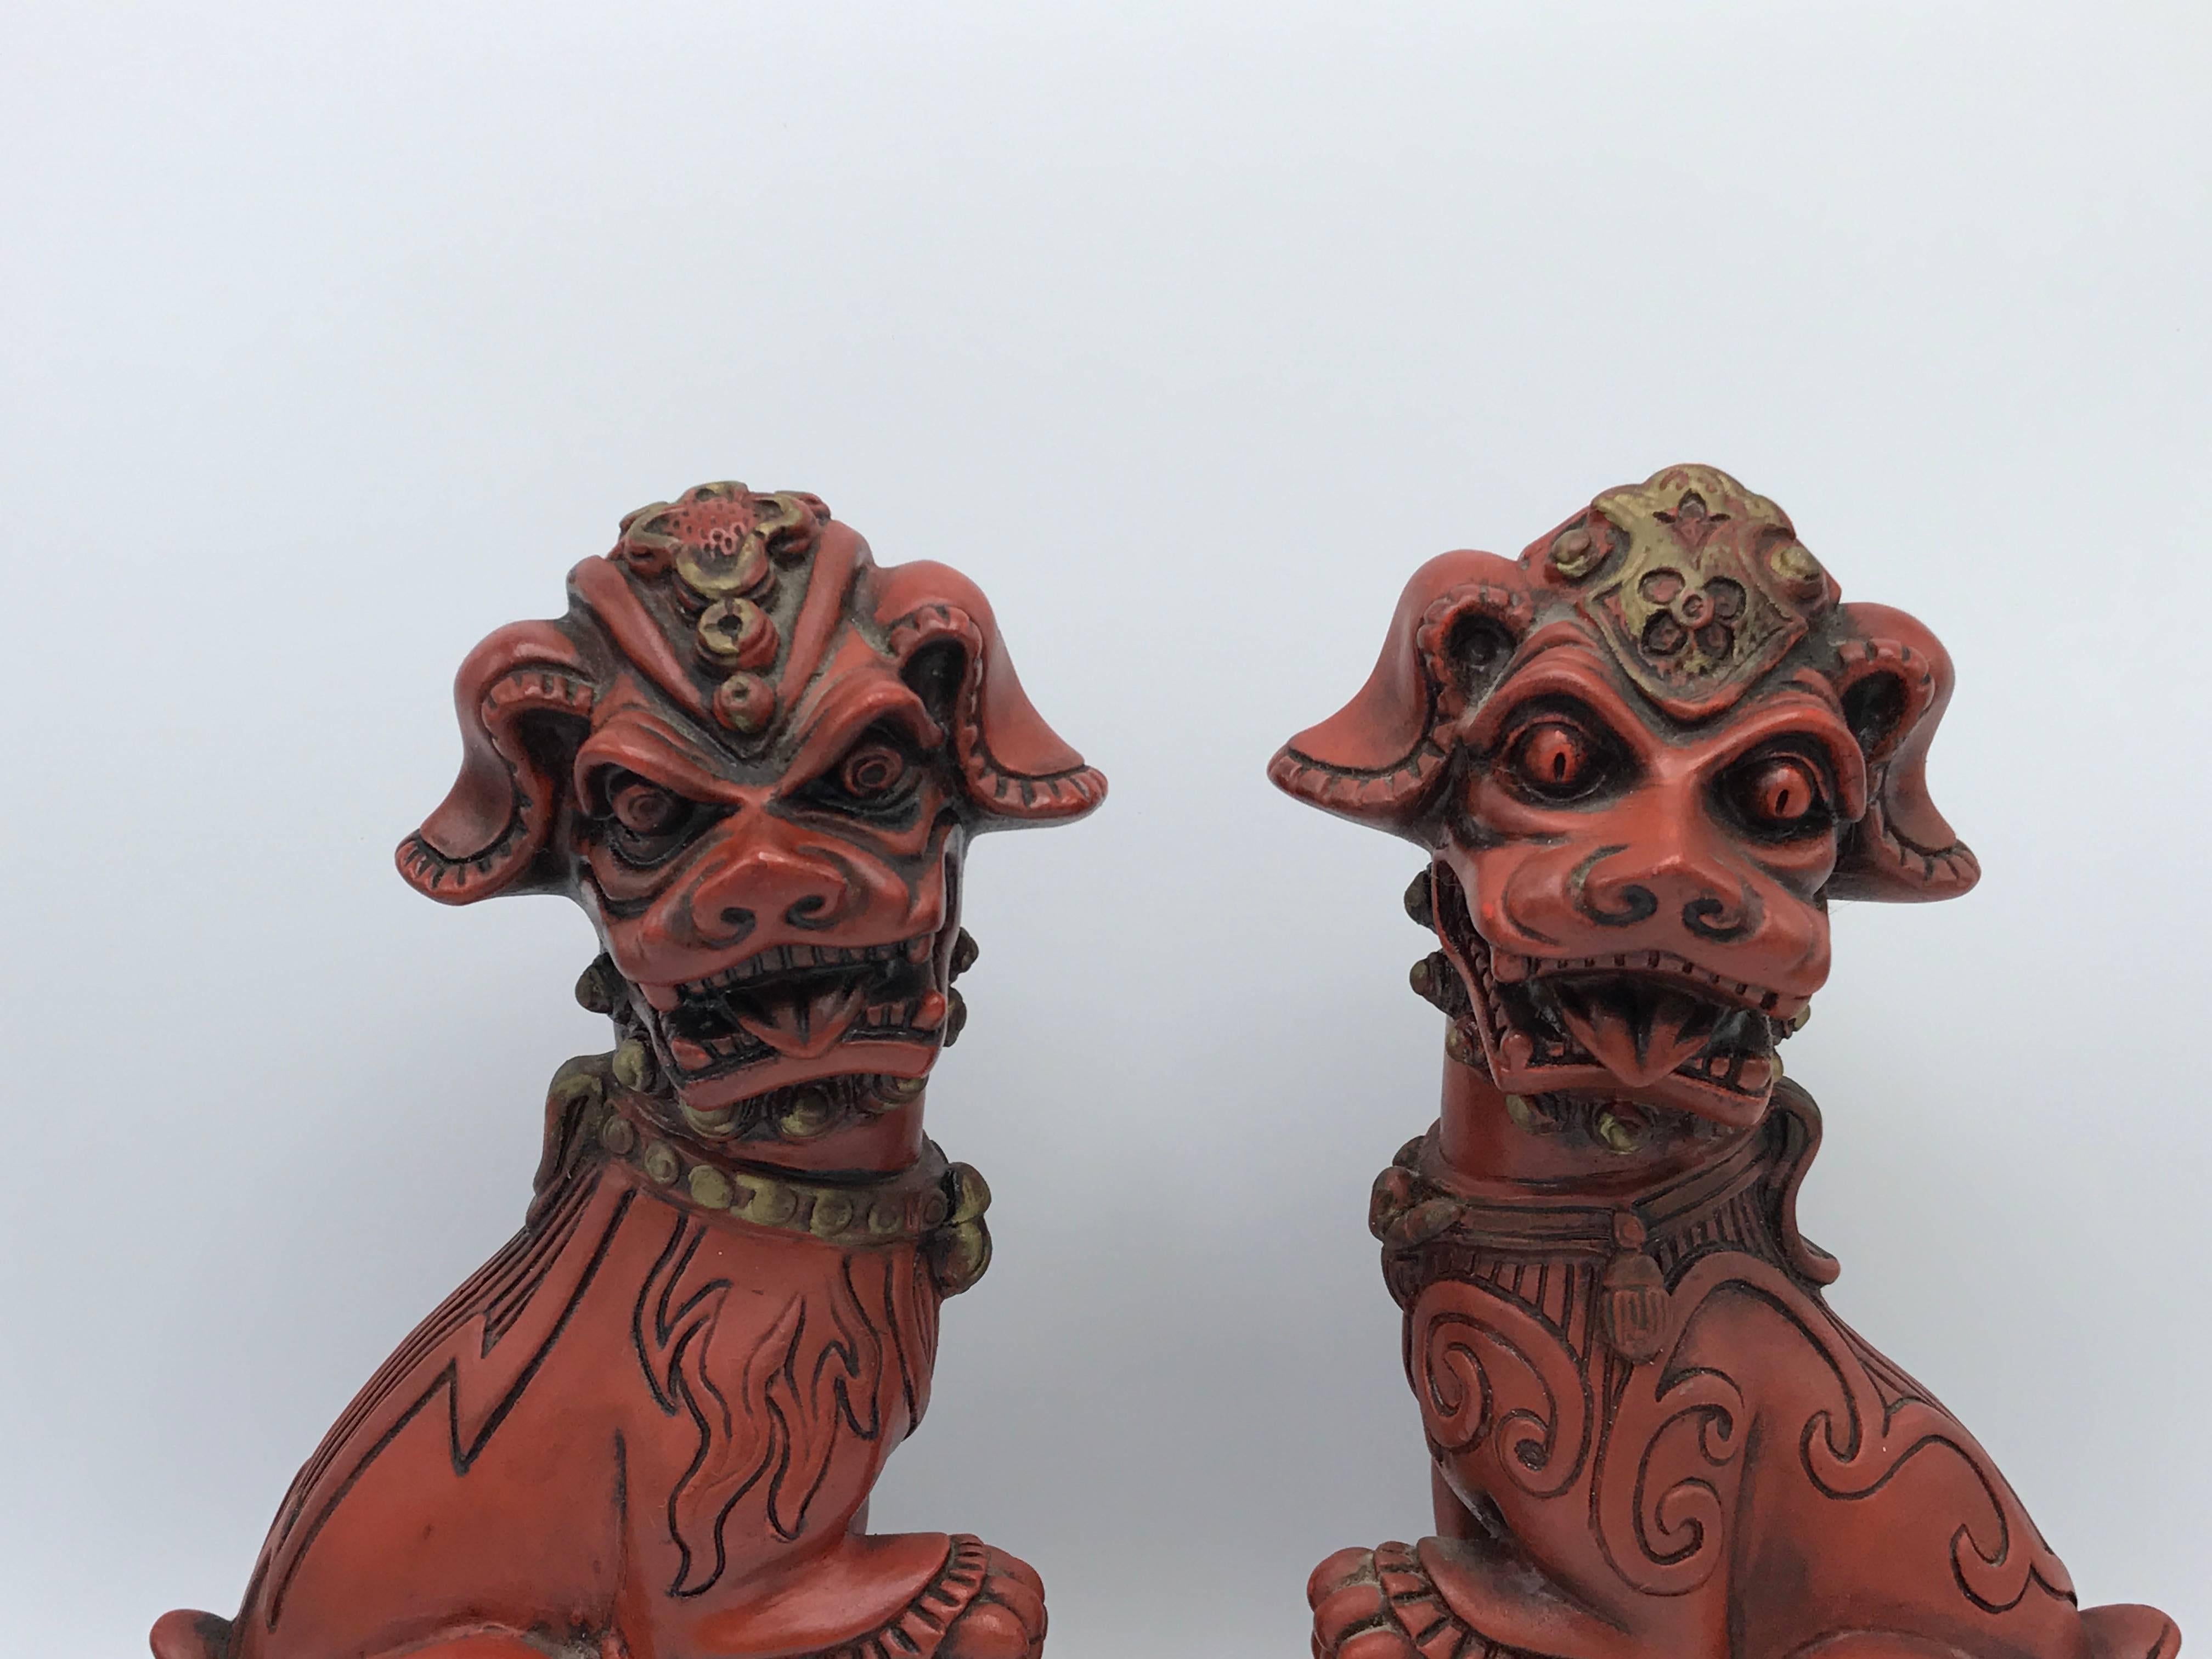 Offered is a gorgeous pair of 1960s, heavily detailed, red resin foo dogs. Would make great bookends!